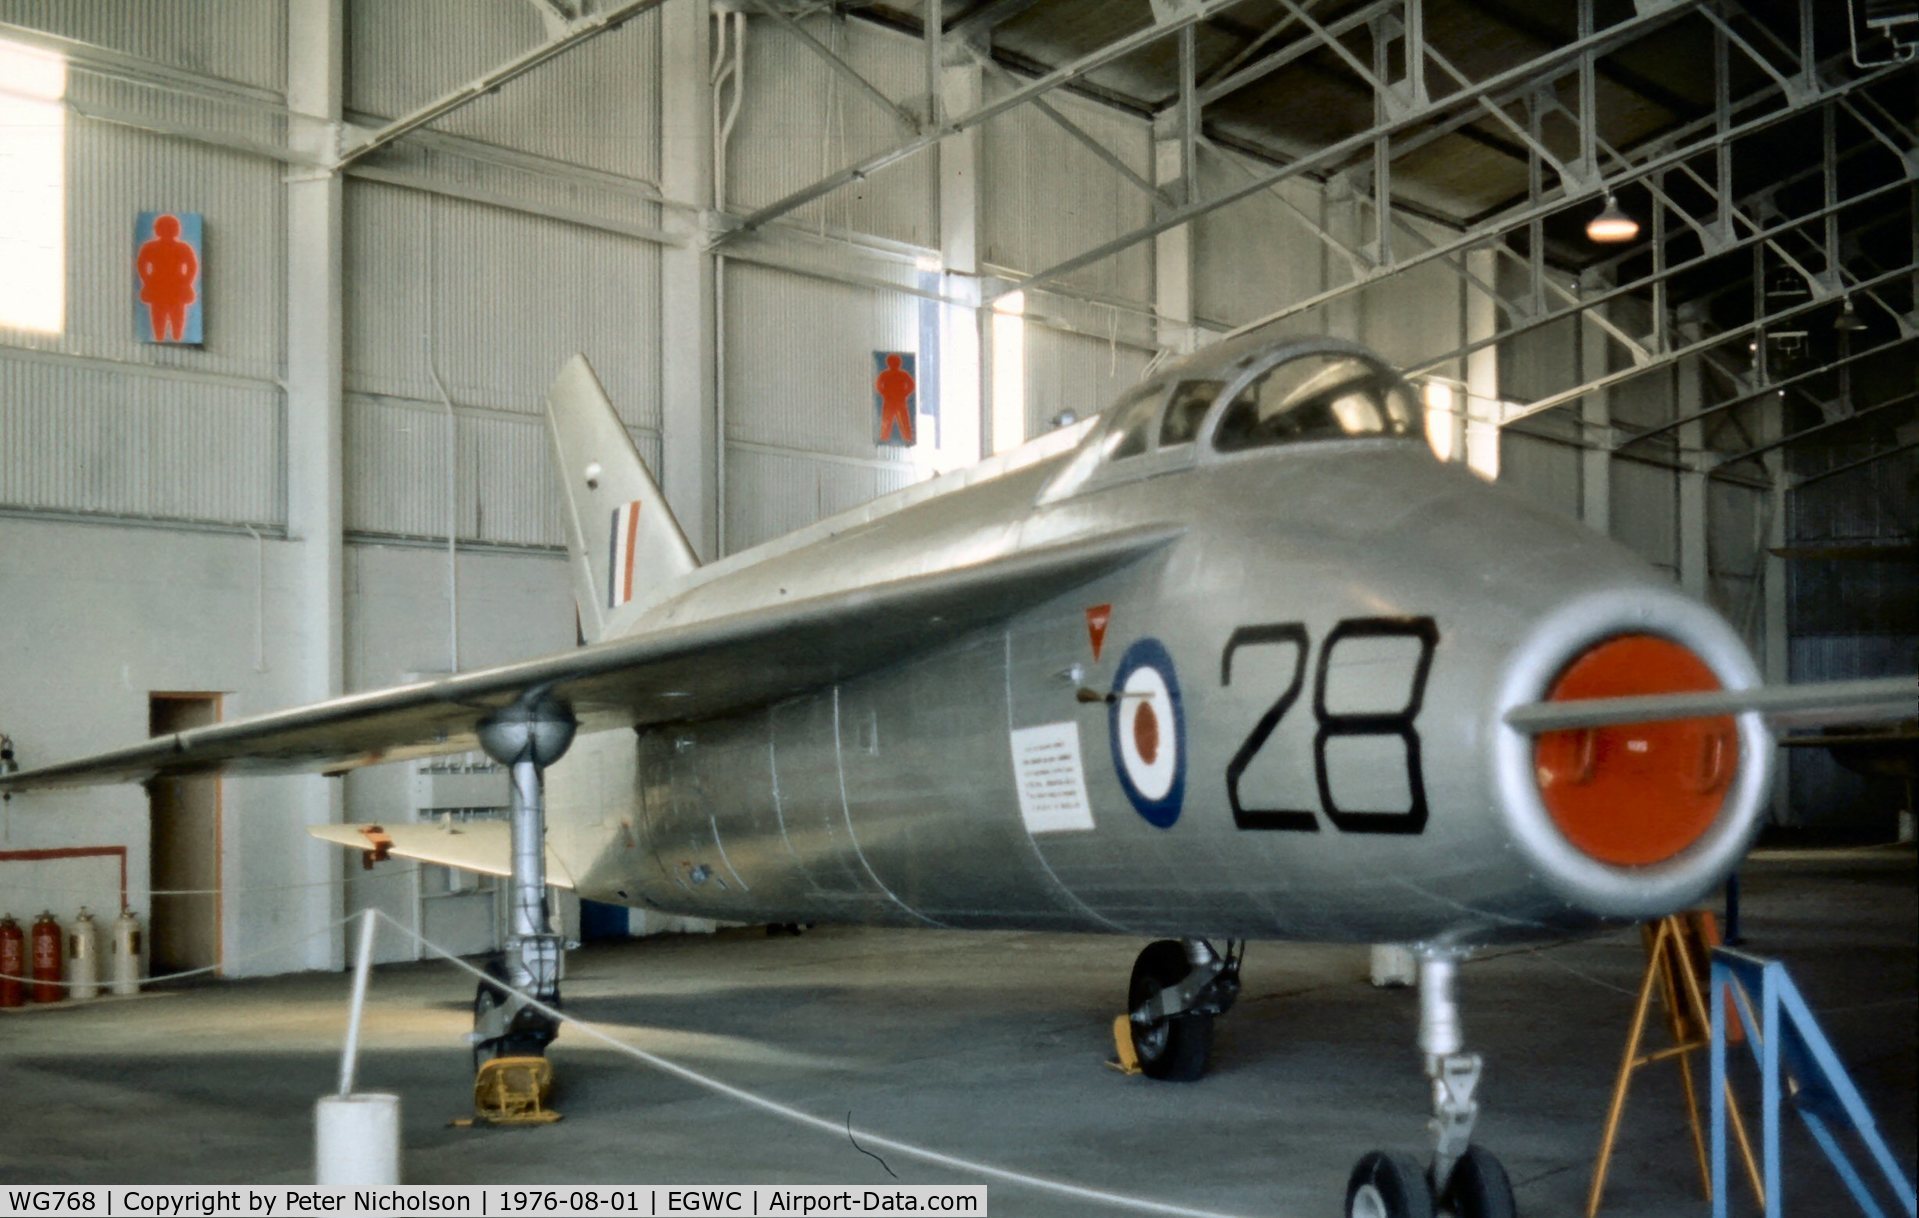 WG768, 1952 Short SB.5 C/N SH1605, Another view of the SB.5 research aircraft on display at Cosford in the Summer of 1976.